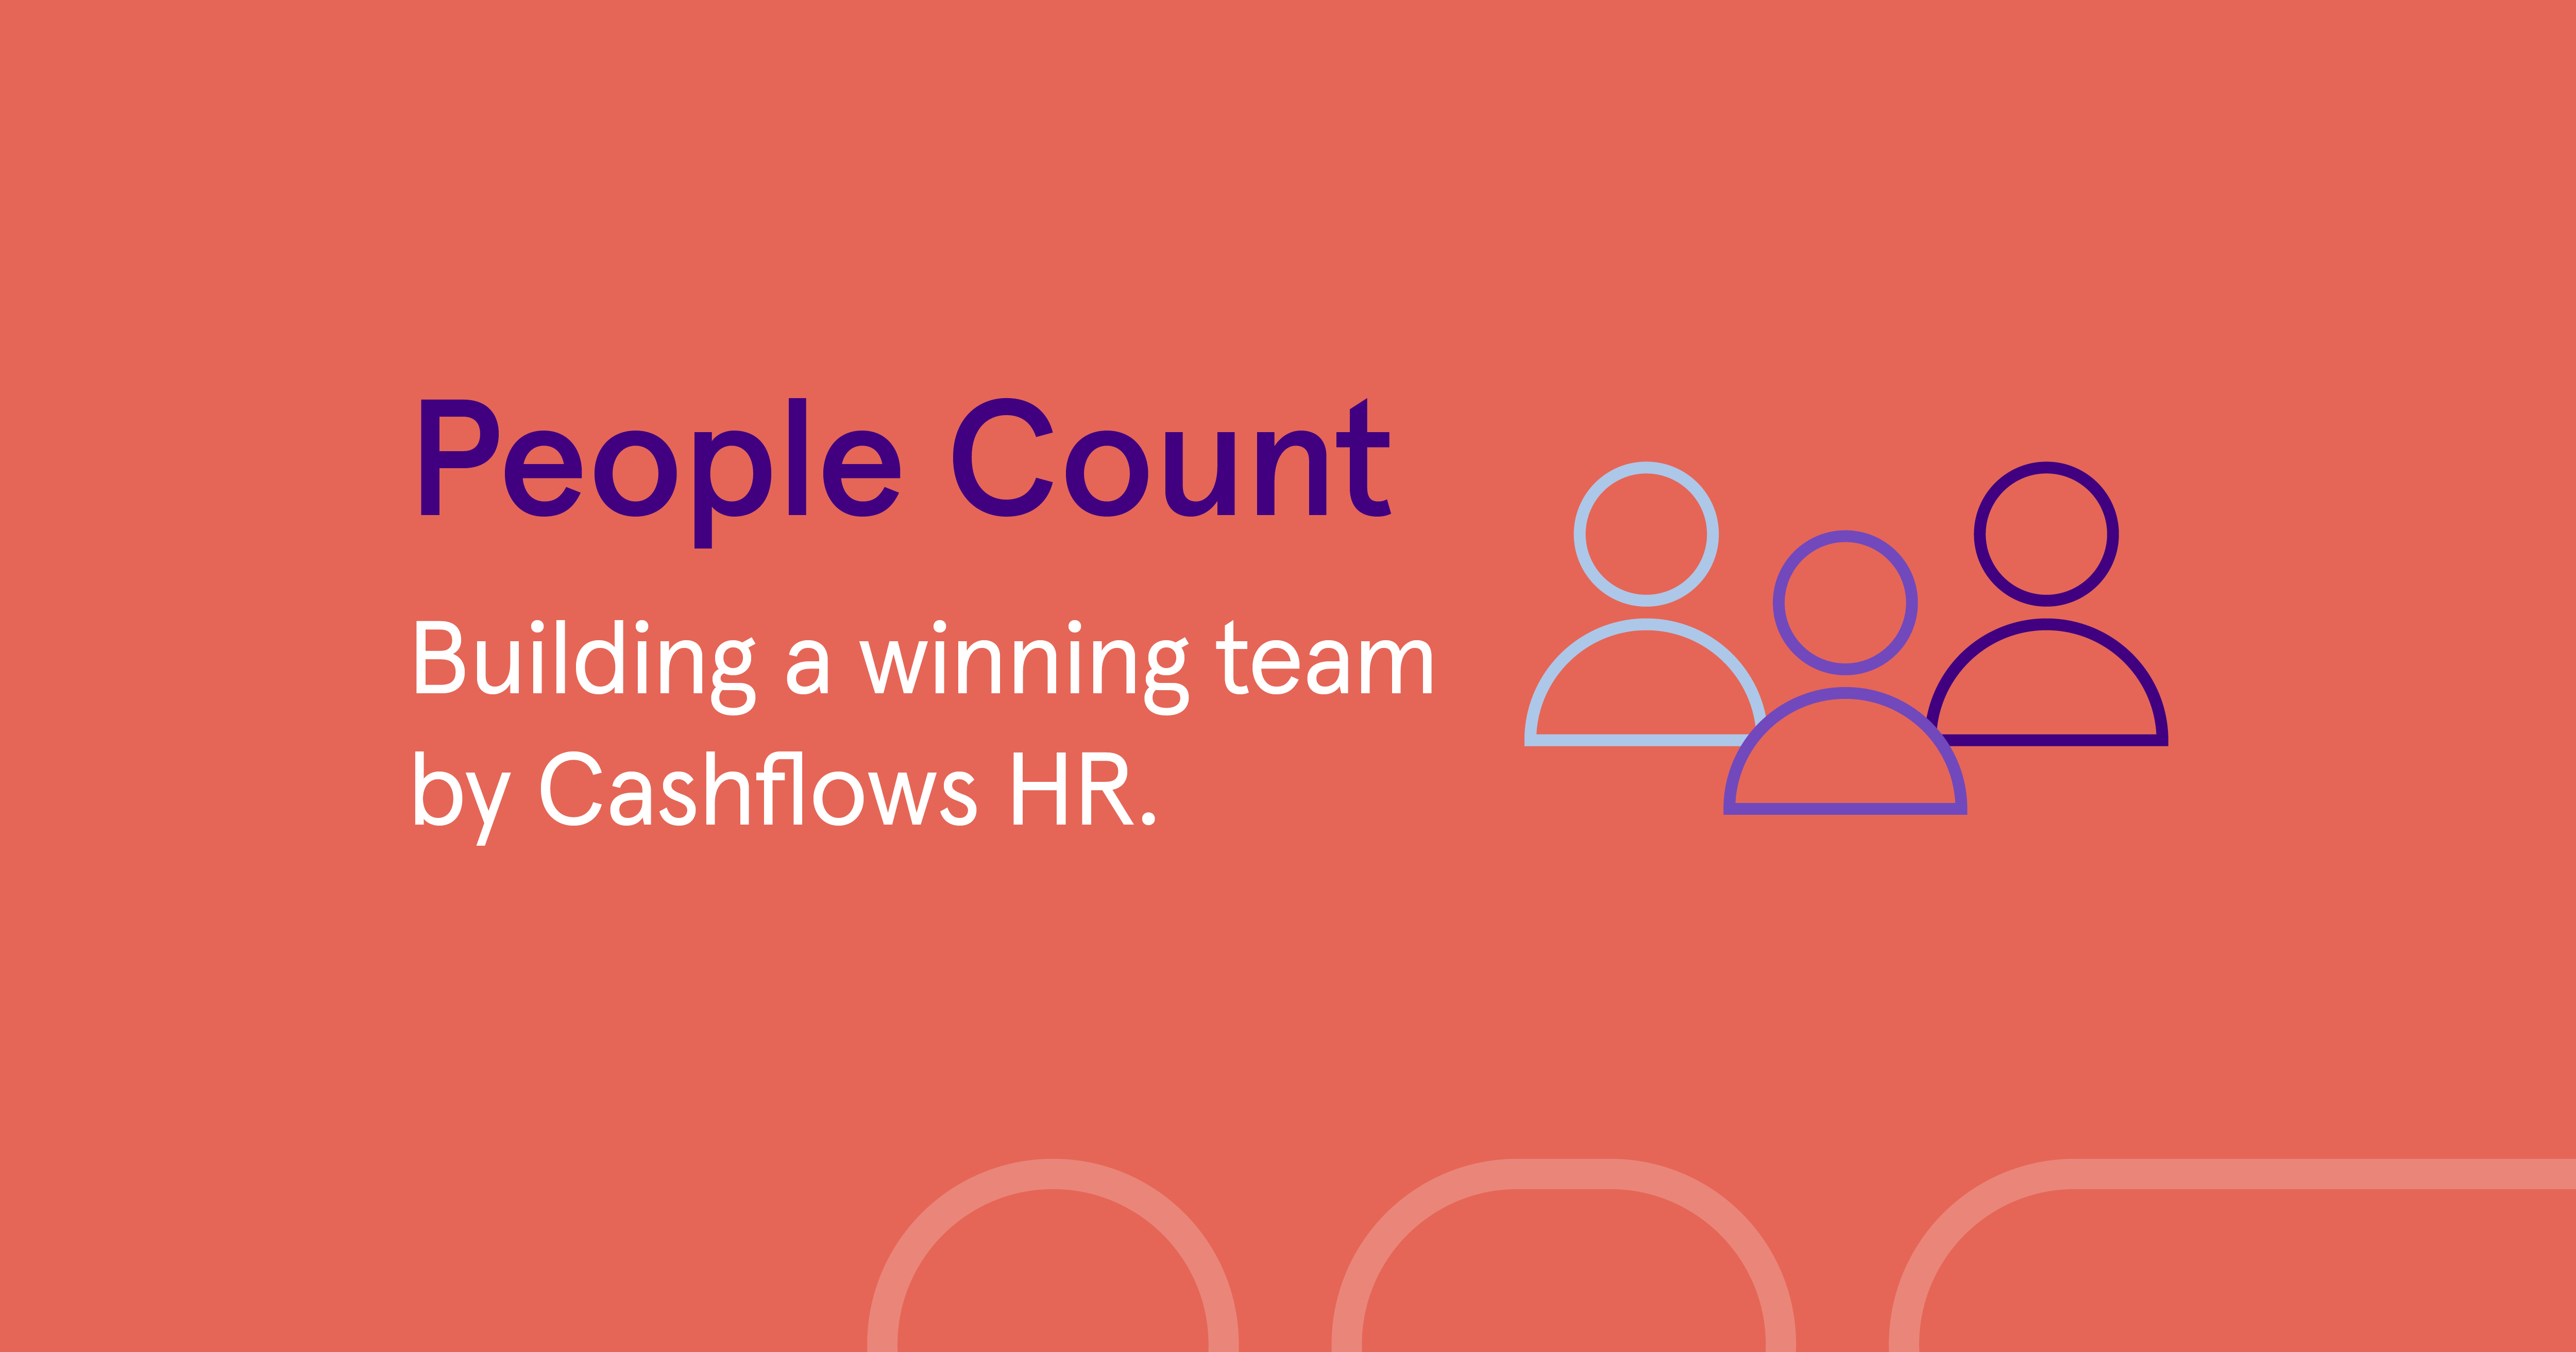 People count: Building a winning team by Cashflows HR